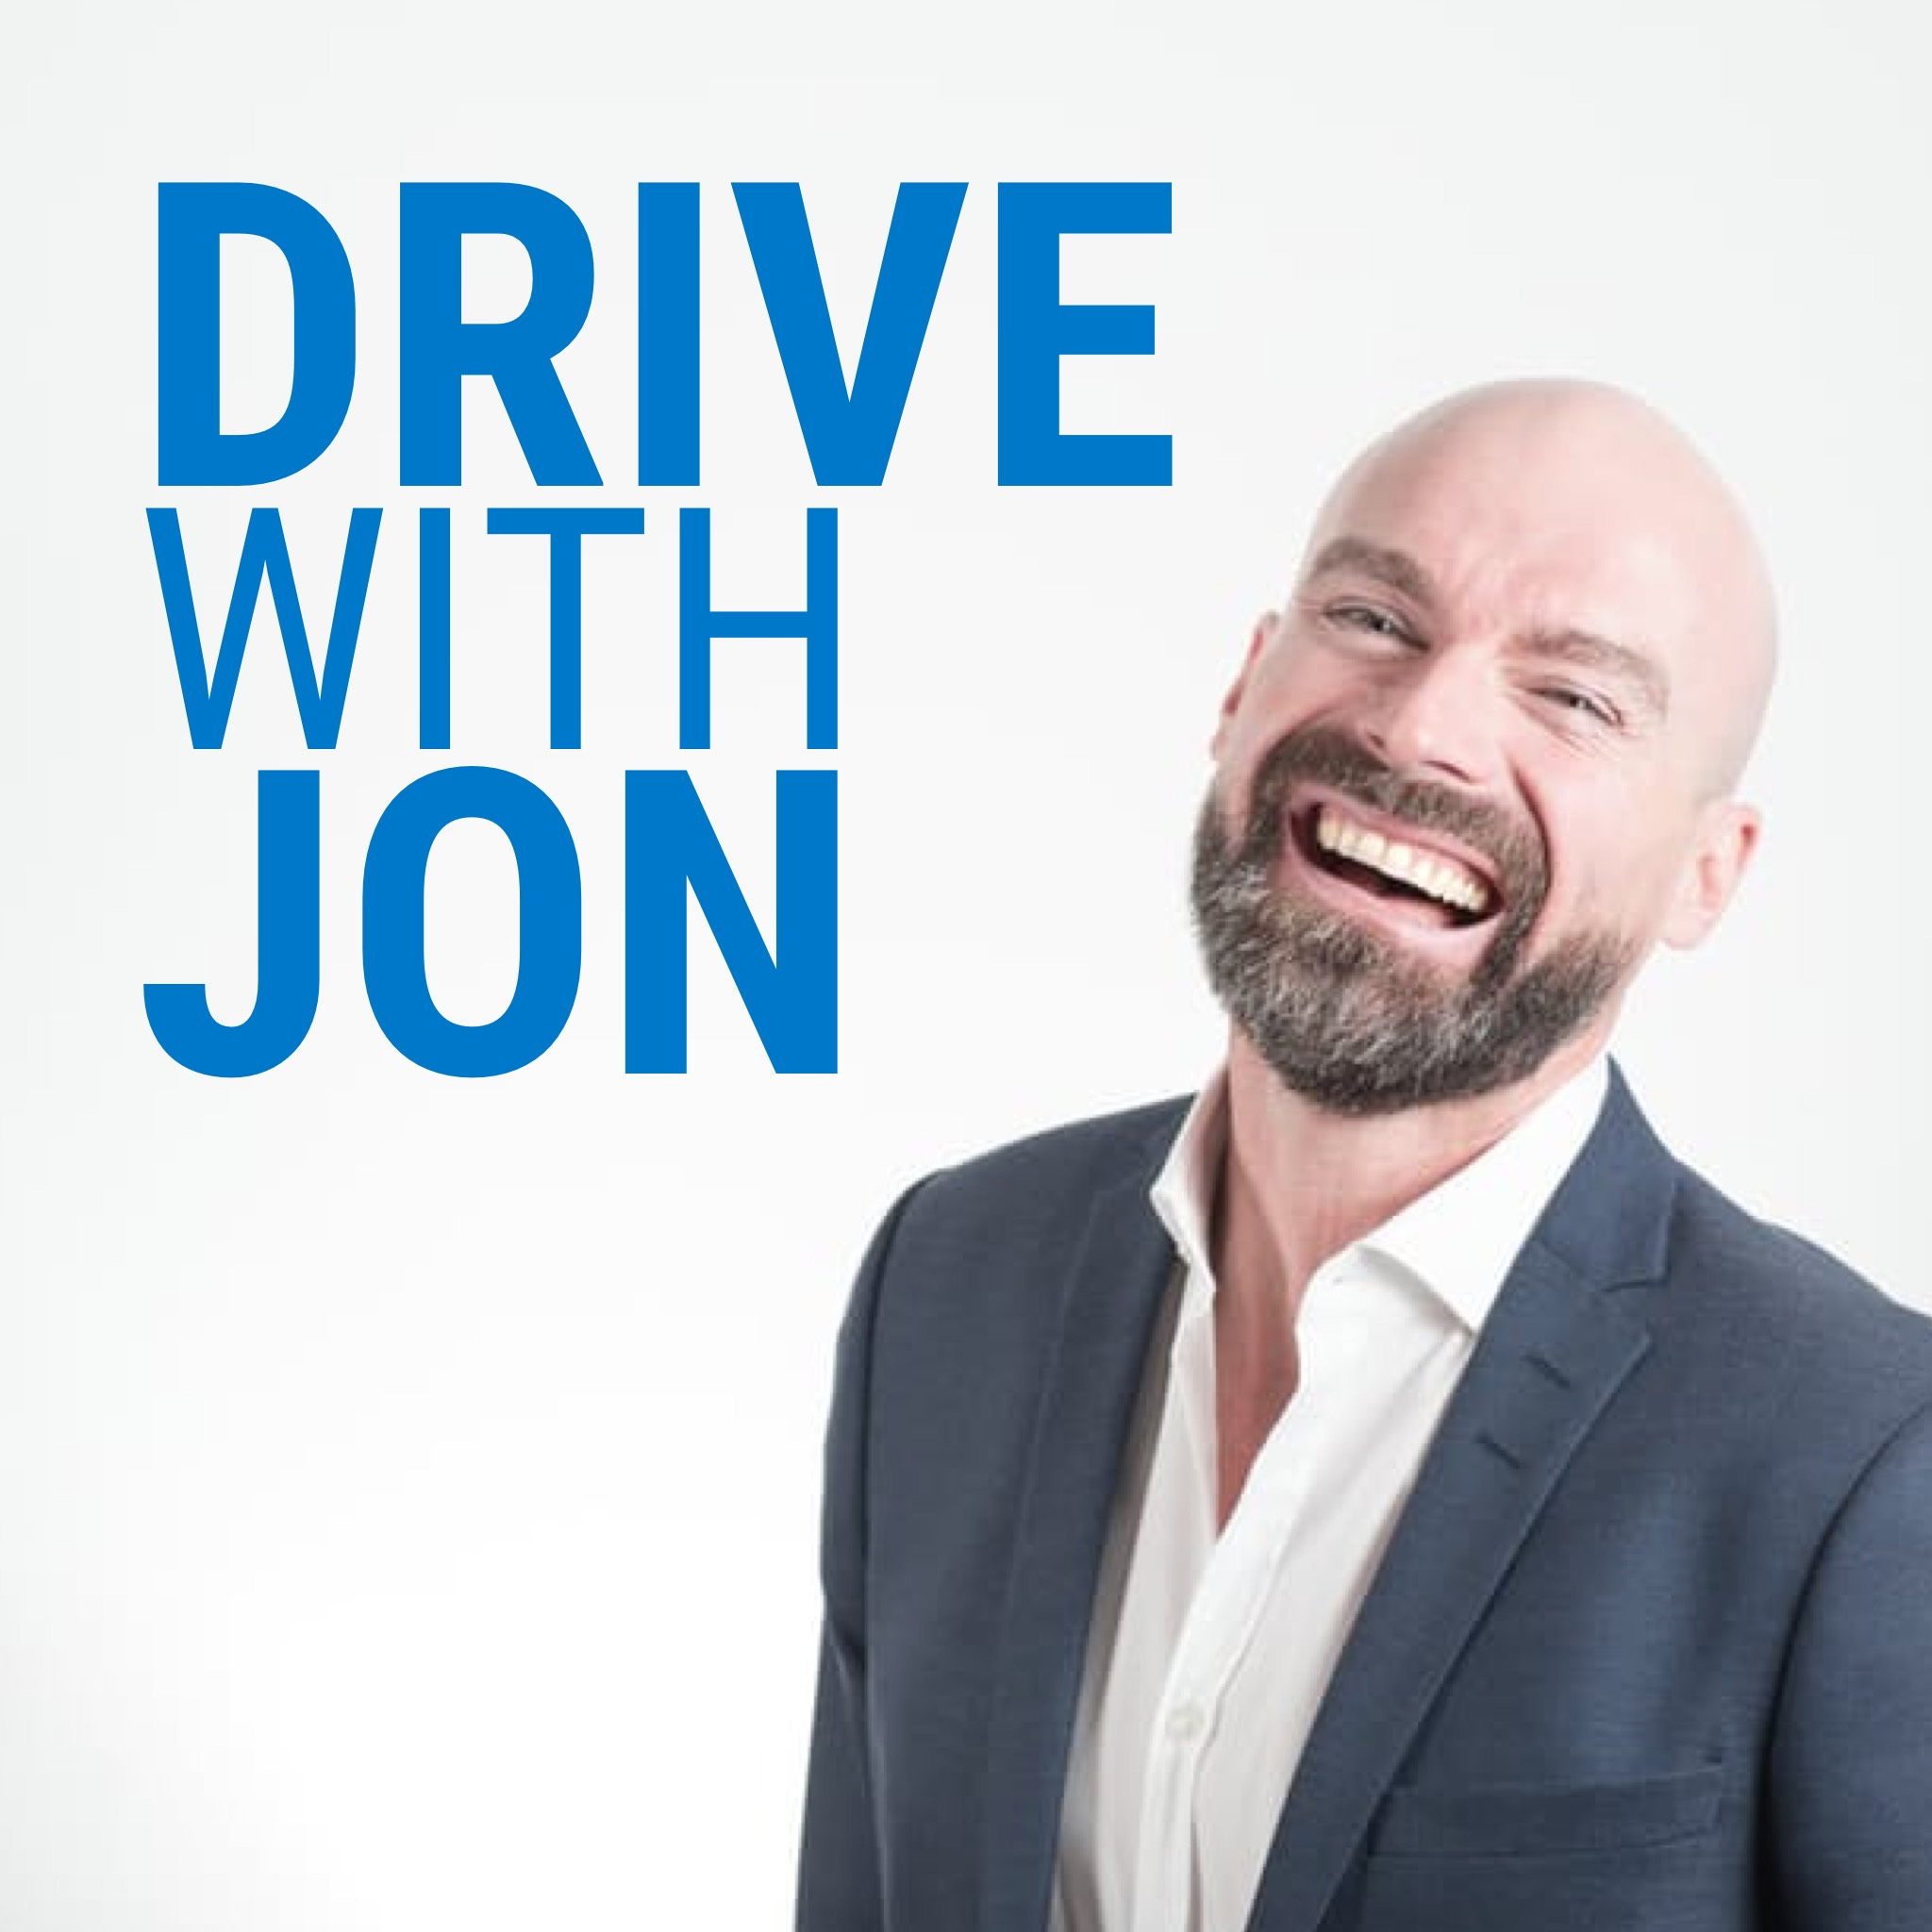 Copy of 9:24 pm - Drive with Jon